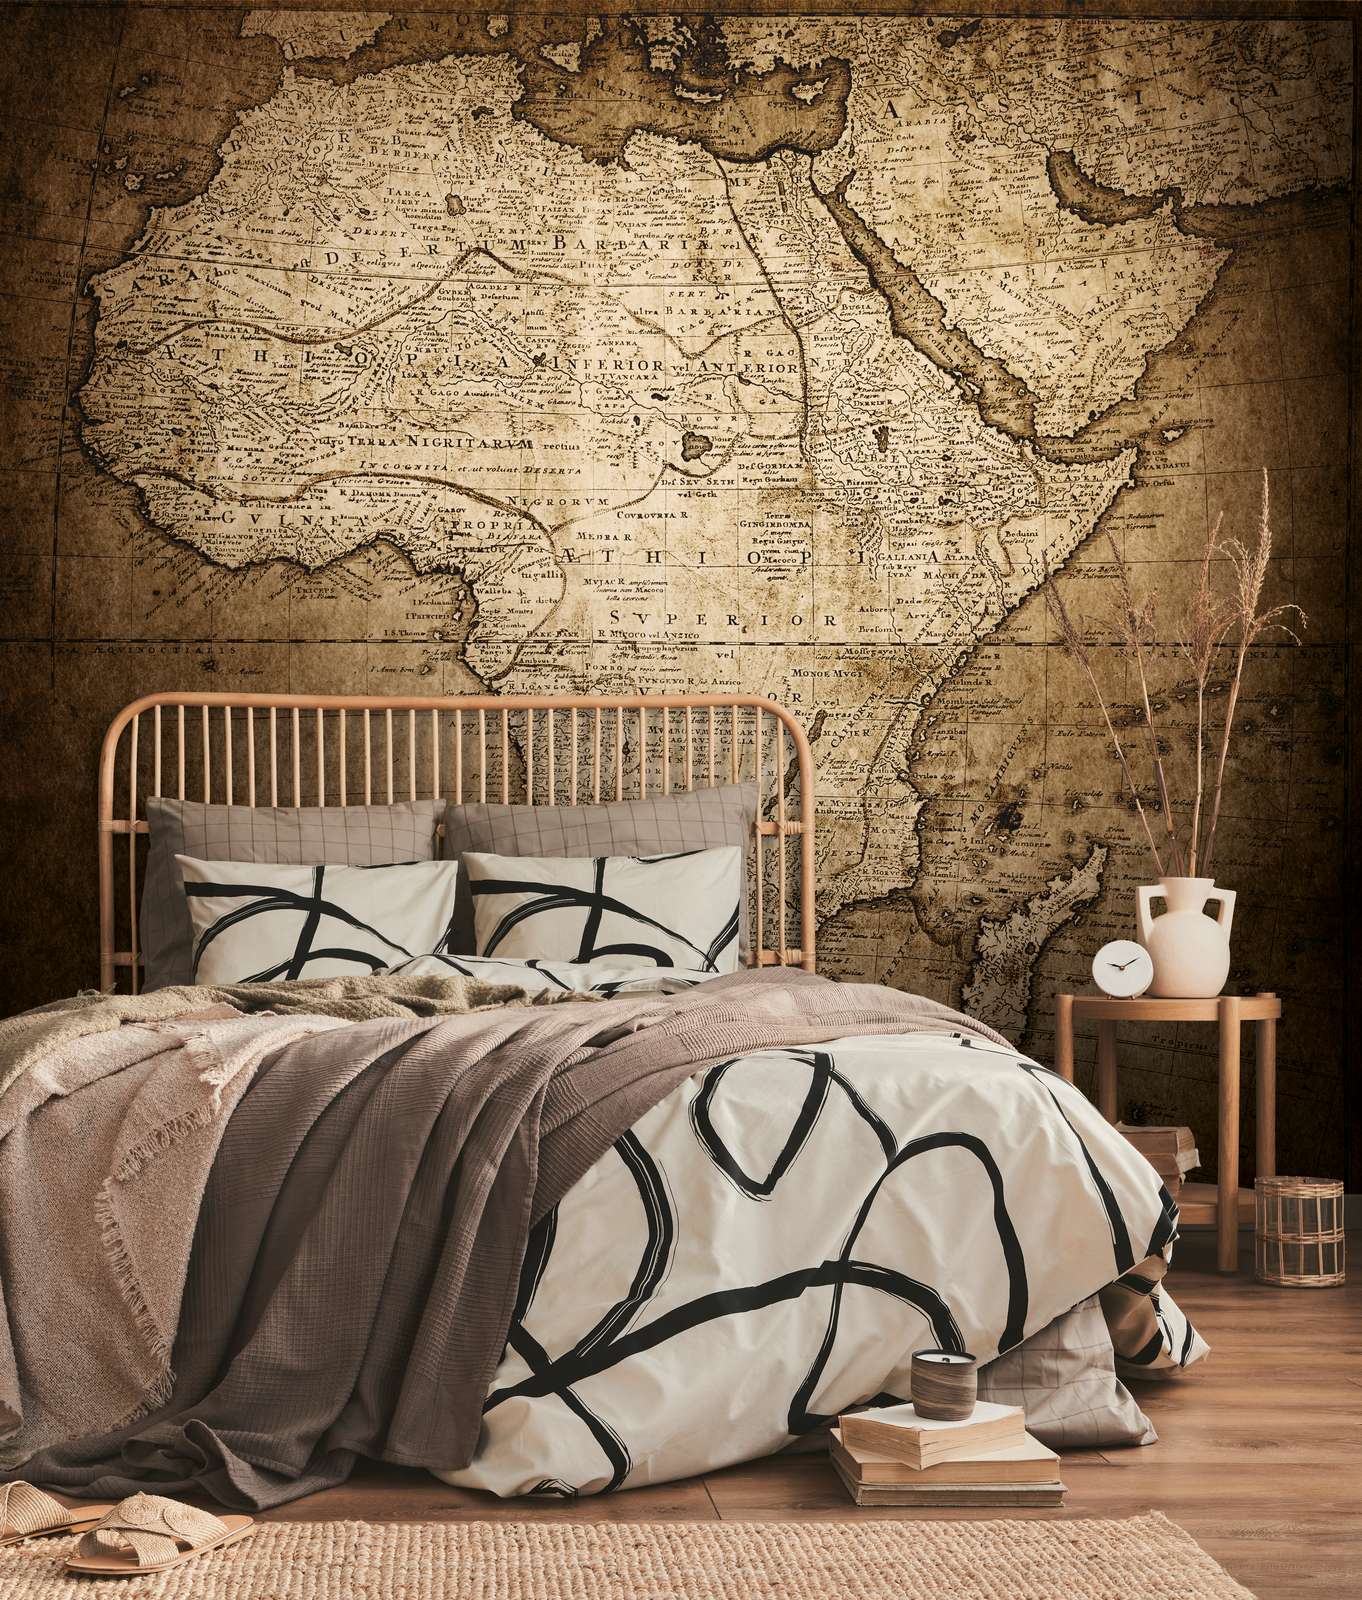             Vintage style Africa map mural
        